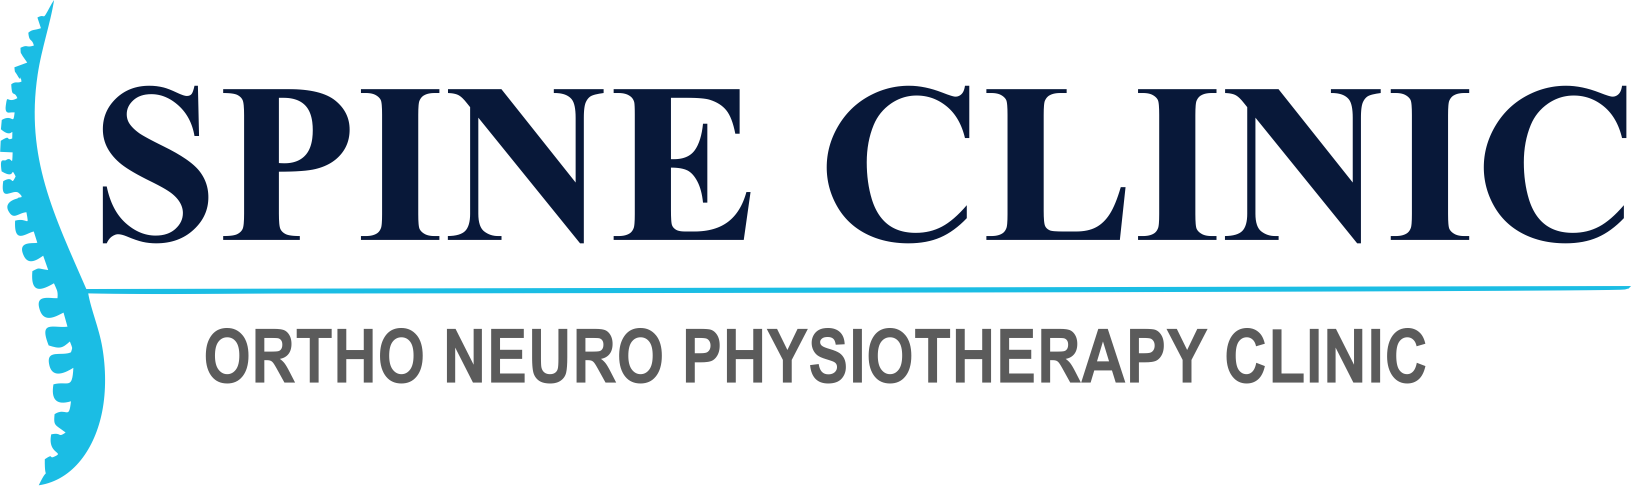 Spine Clinic | Ortho Neuro Physiotherapy Clinic